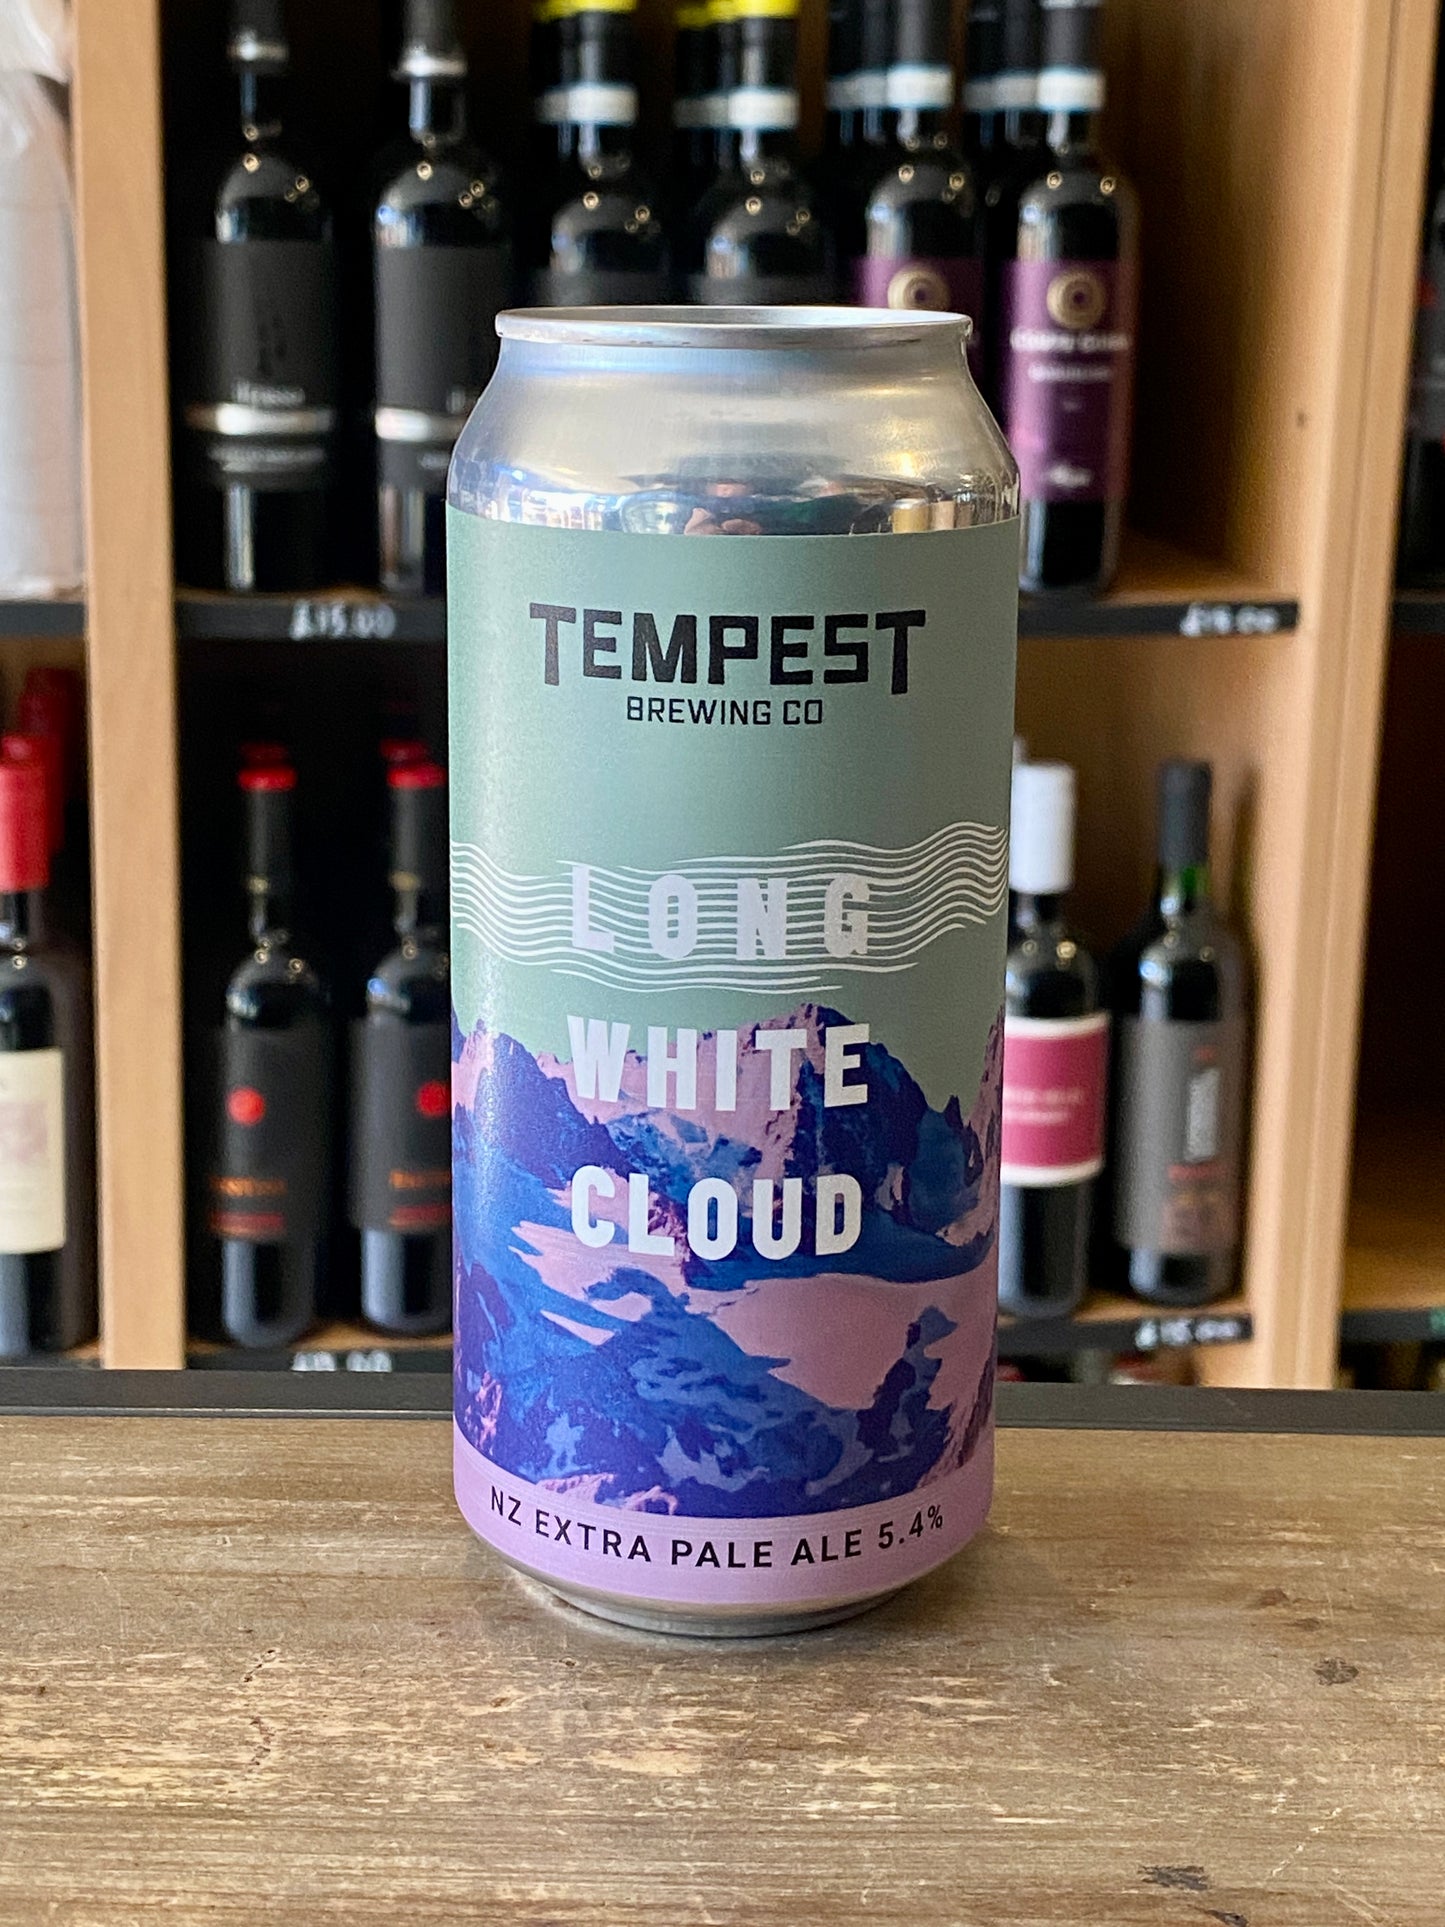 Tempest Brewing Long White Cloud